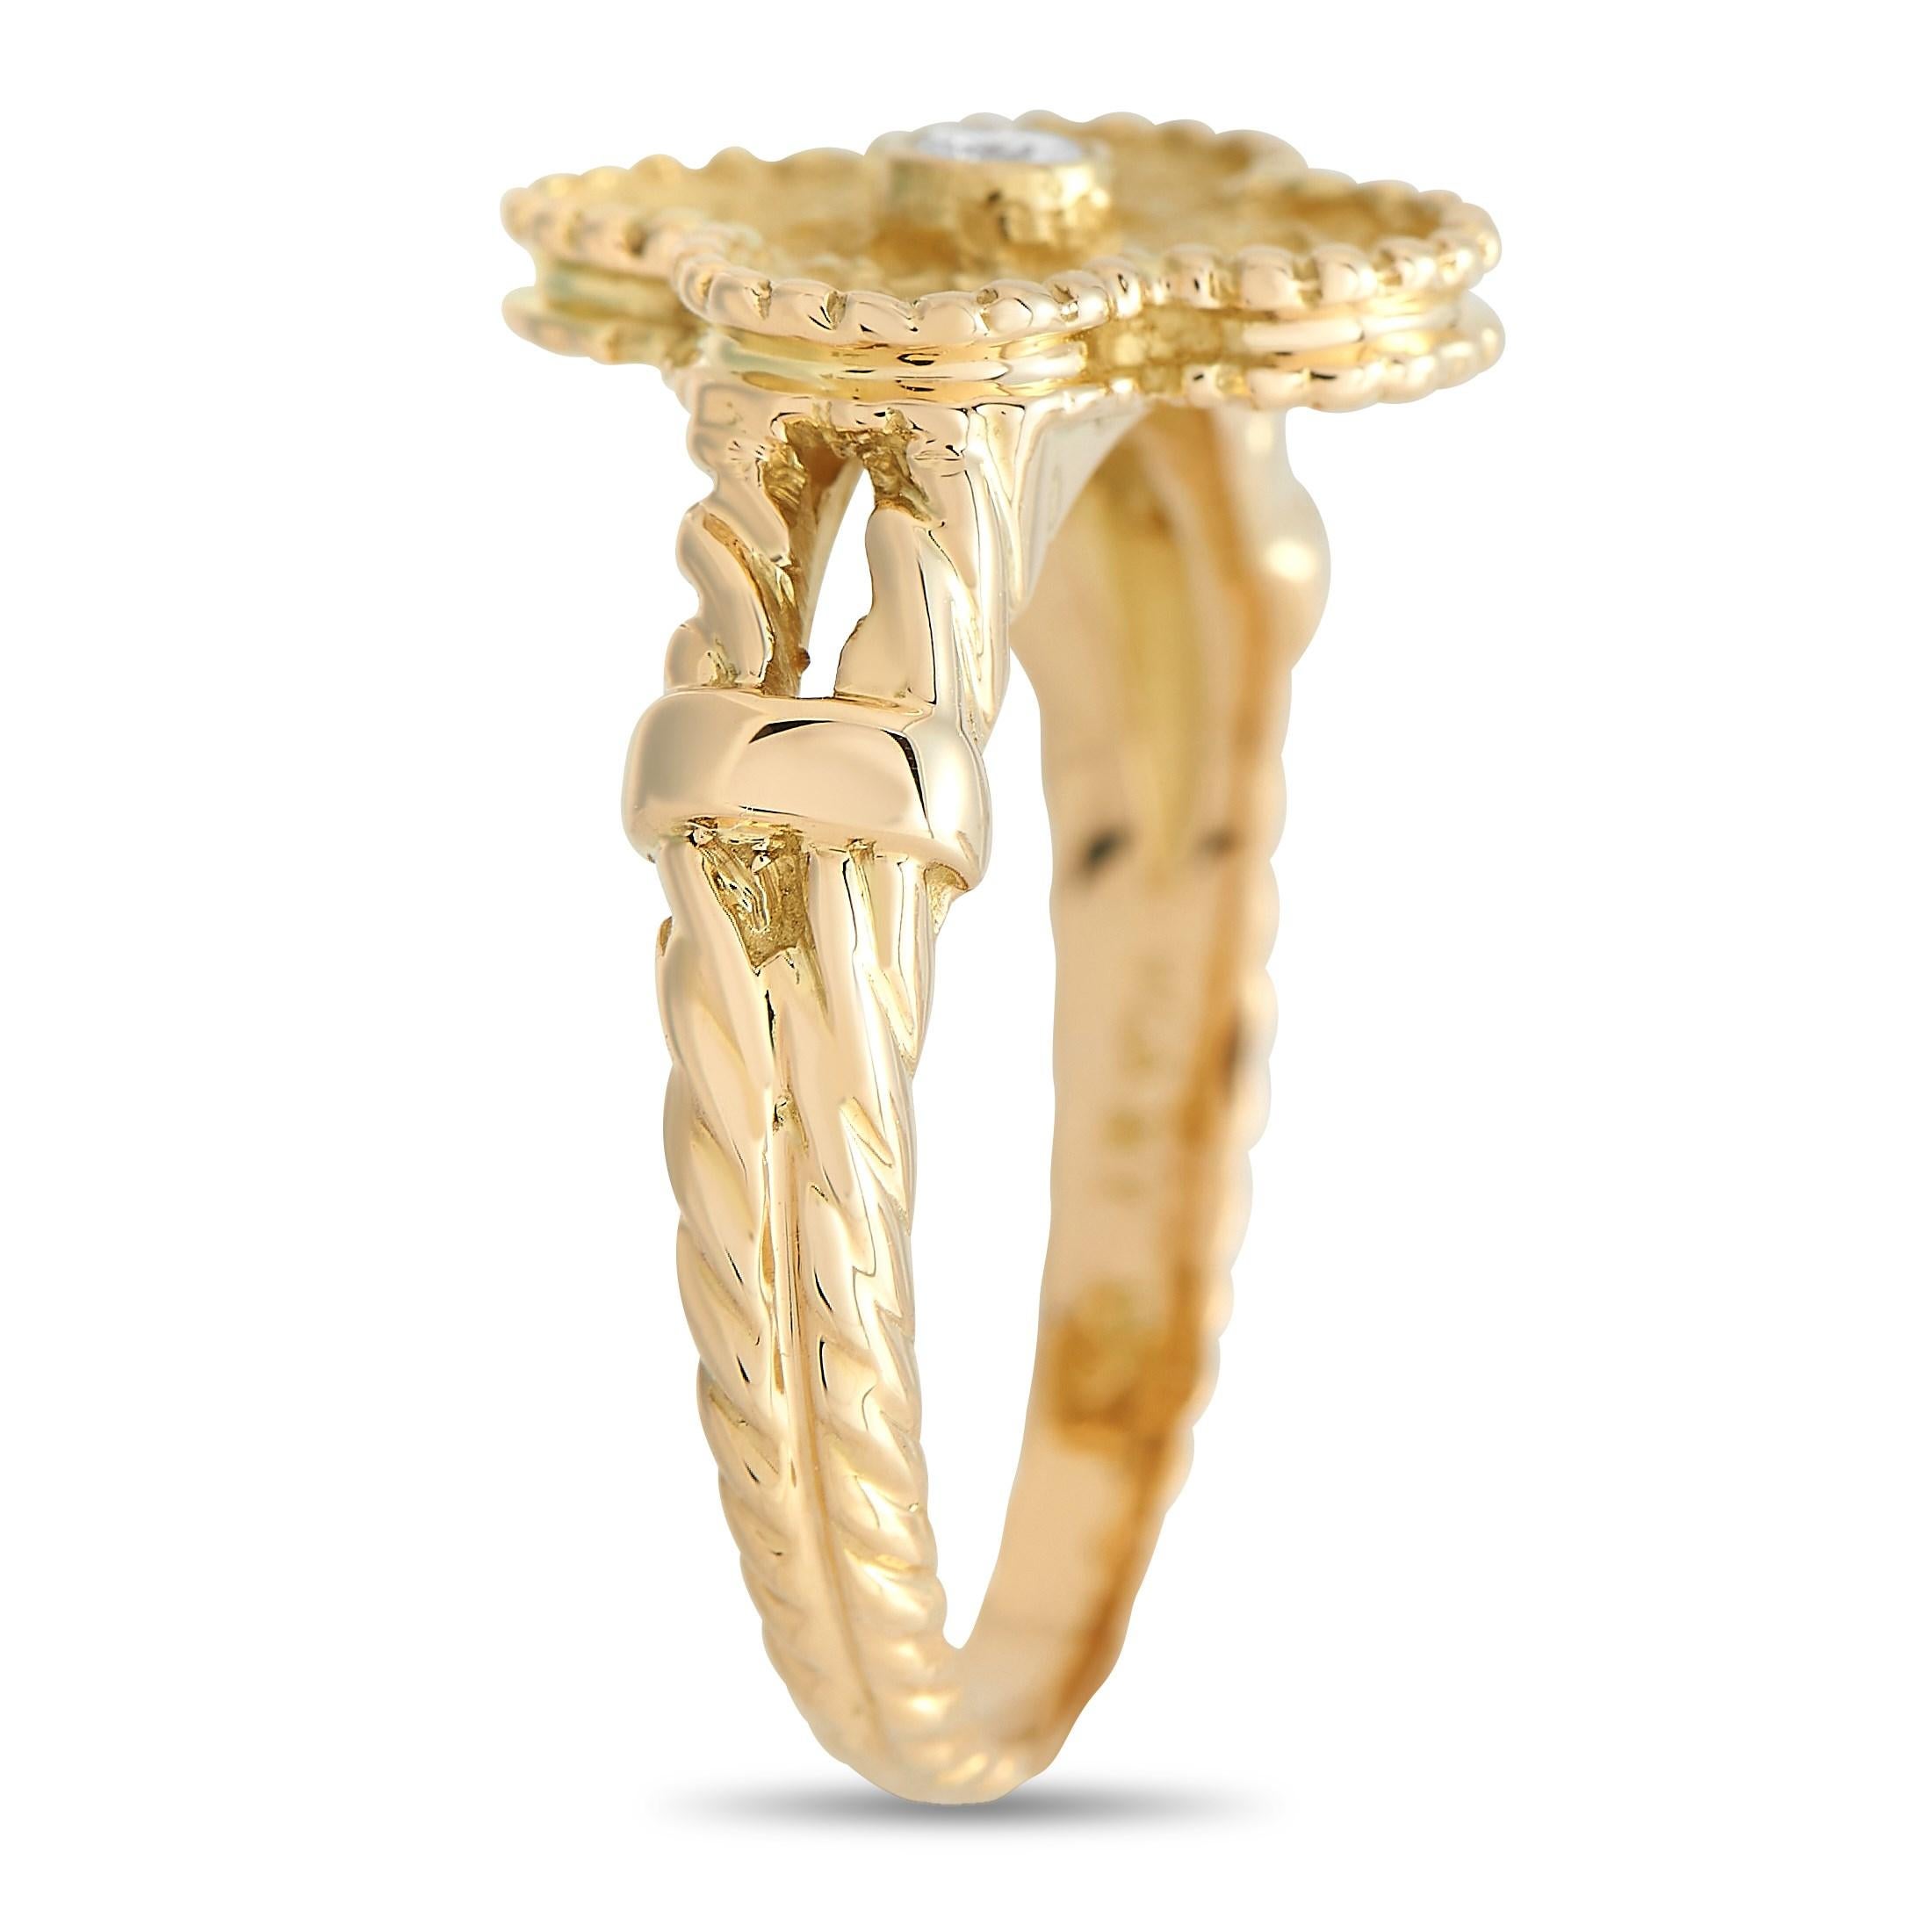 Clad in 18K yellow gold is this intricately crafted Van Cleef & Arpels Alhambra Ring. The band features a twisted rope profile with shoulders that subtly split to draw eyes toward the Alhambra centerpiece. The four-leaf clover-inspired motif has the